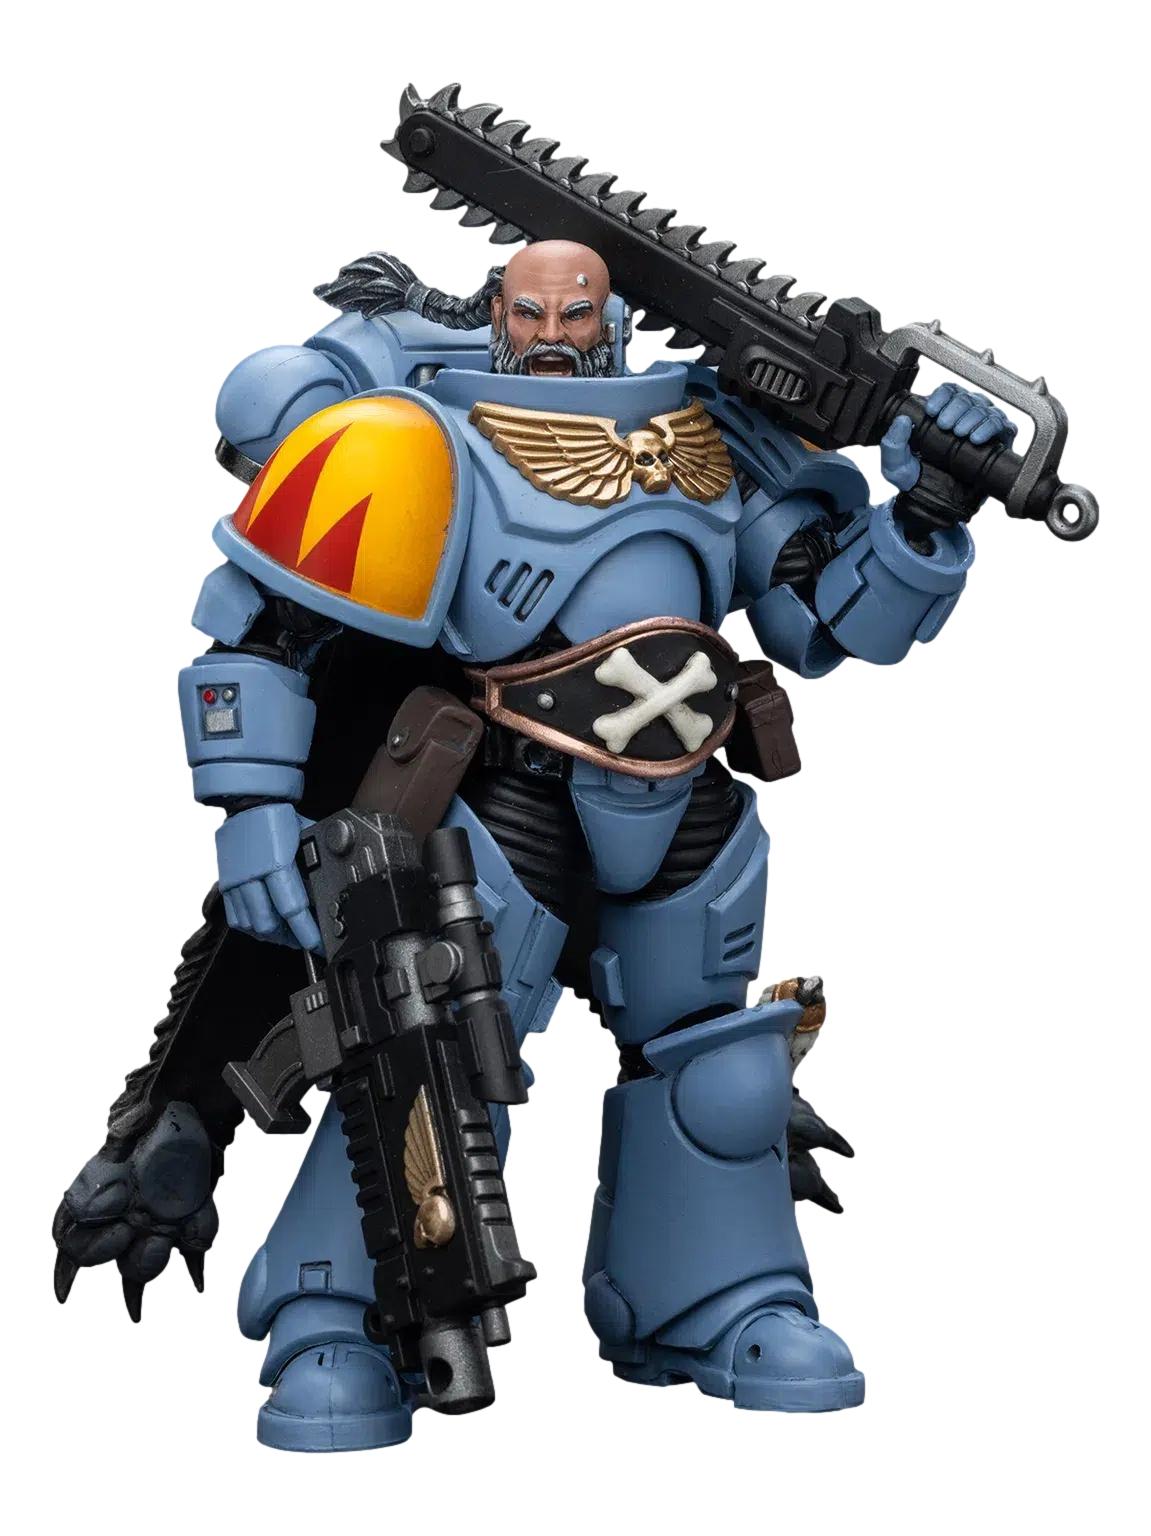 Warhammer 40K: Space Wolves: Claw Pack: Brother Gunnar Joy Toy